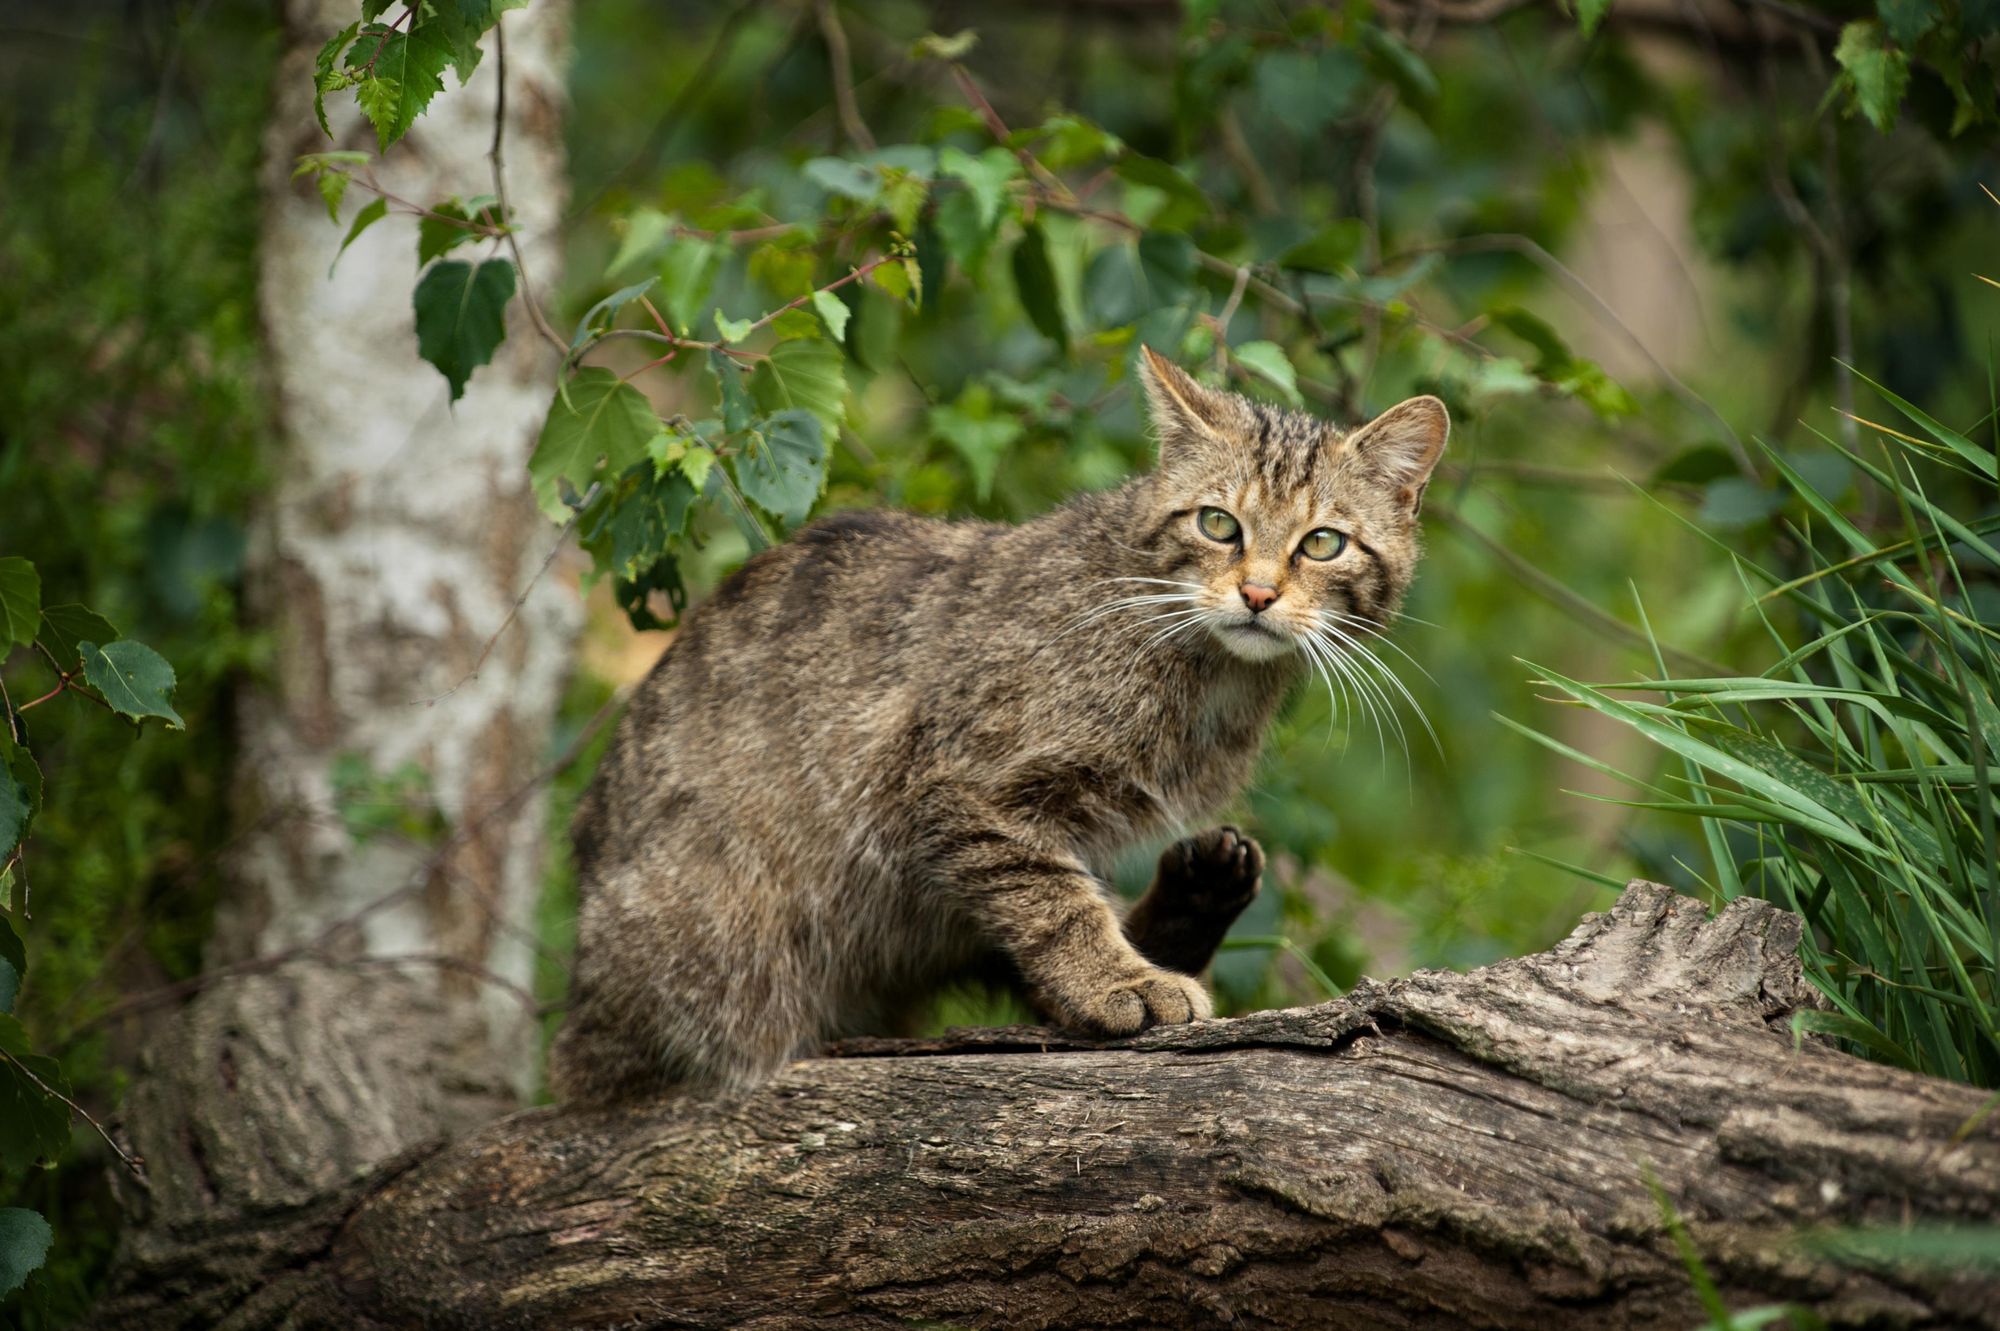 An illusive Scottish Wildcat. While numbers have dwindled, conservation projects are raising numbers. Photo: Getty